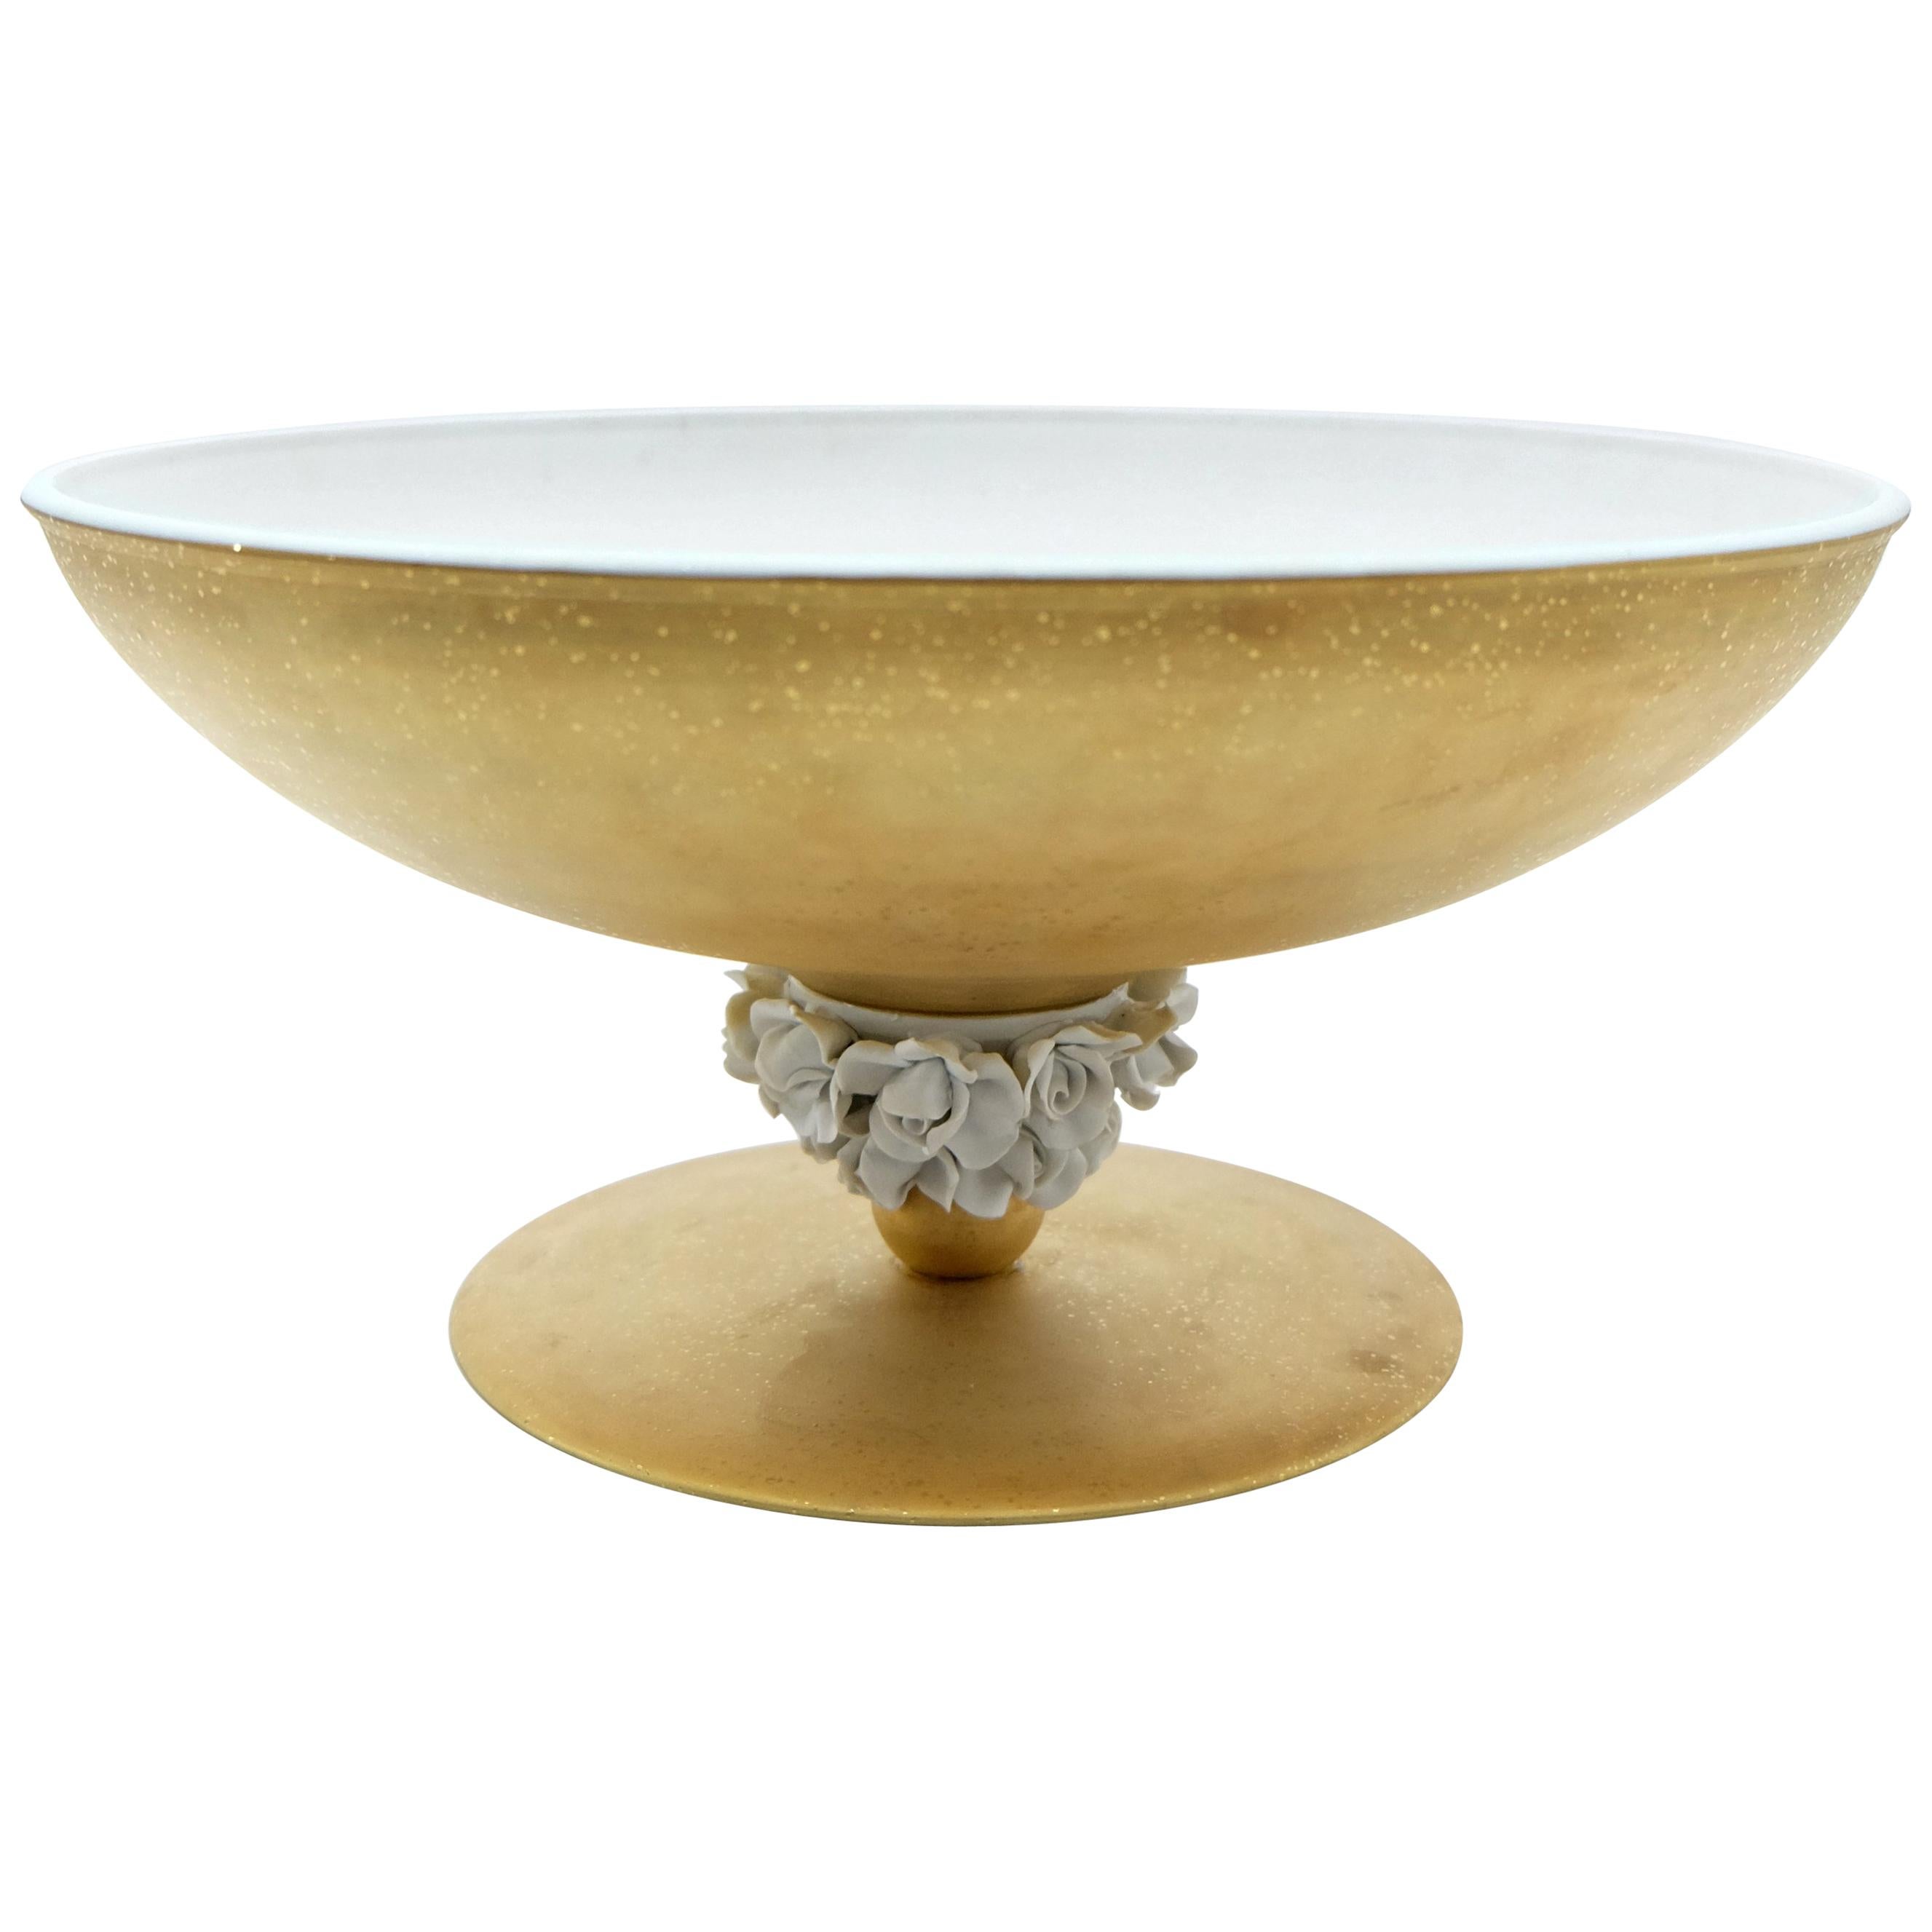 Giulia Mangani Gold and White Porcelain Footed Centerpiece with Flowers